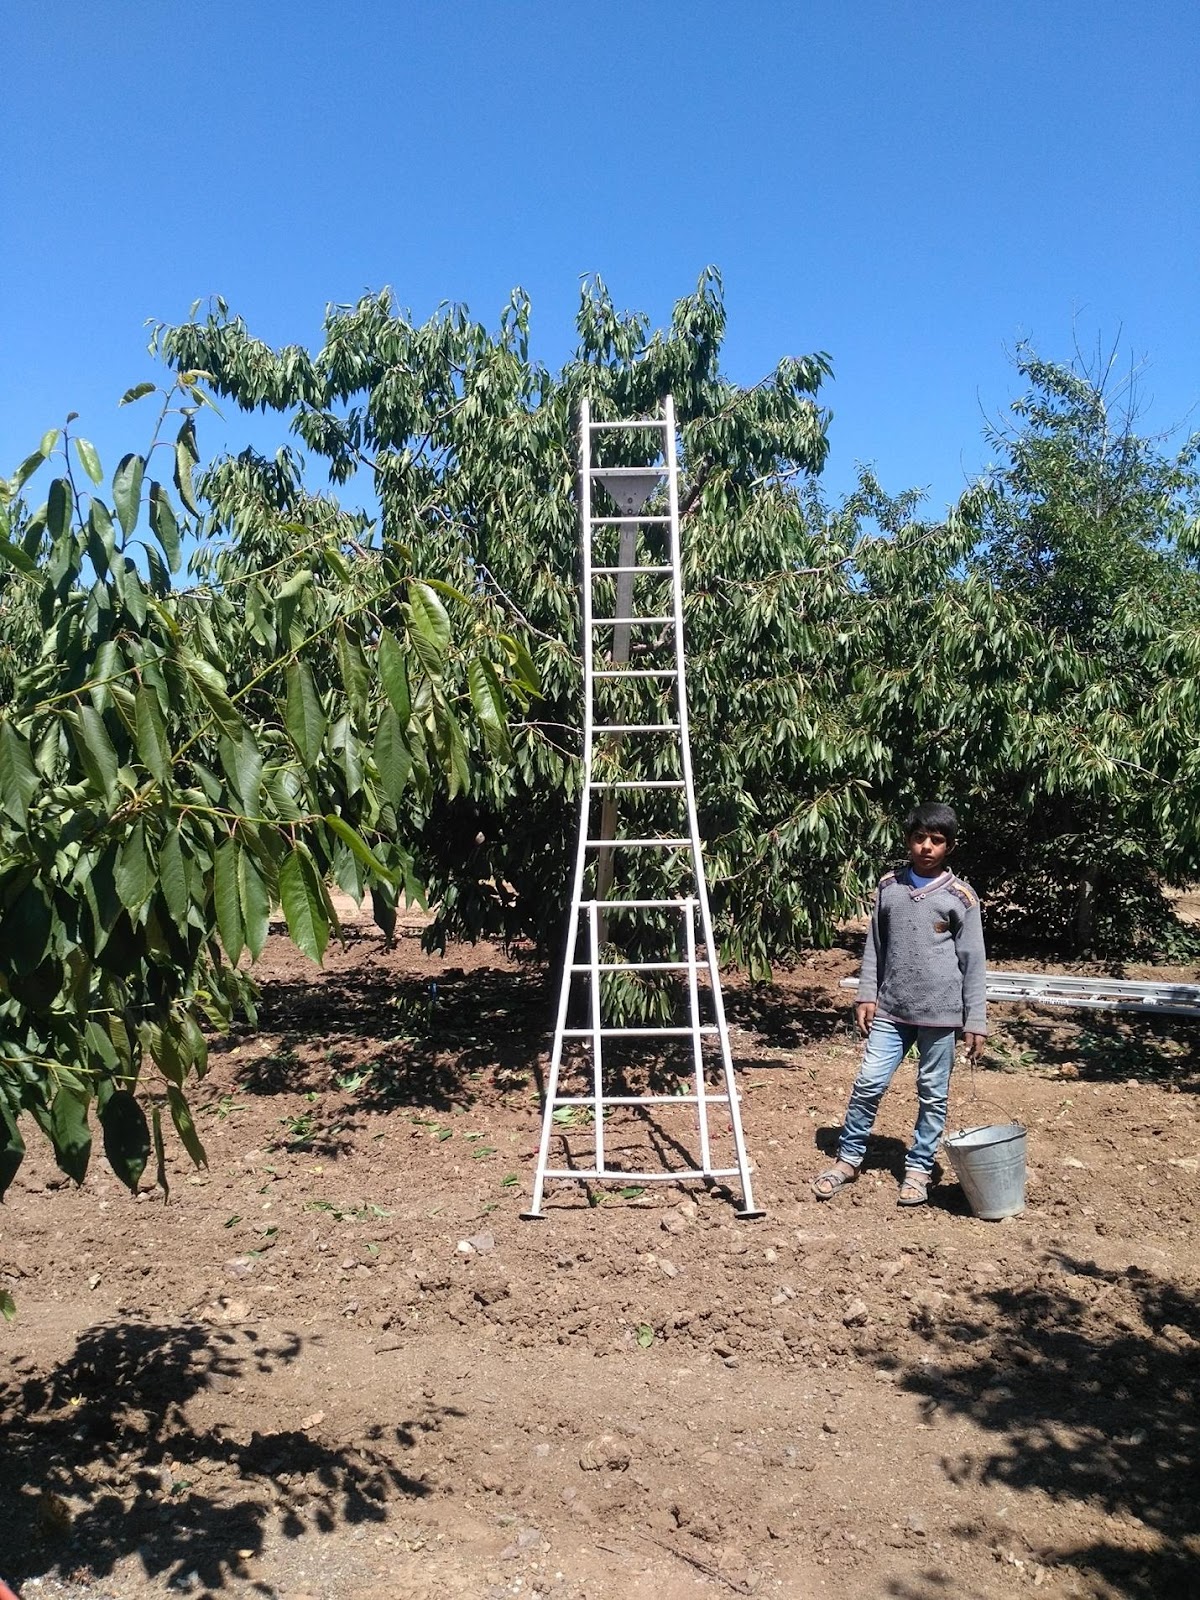 an elementary school age kid with a visible face, wearing long pants, shirt and sandals, holding a bucket for harvesting cherries standing next to a ladder three times their hight next to a cherry tree on a bright sunny day.